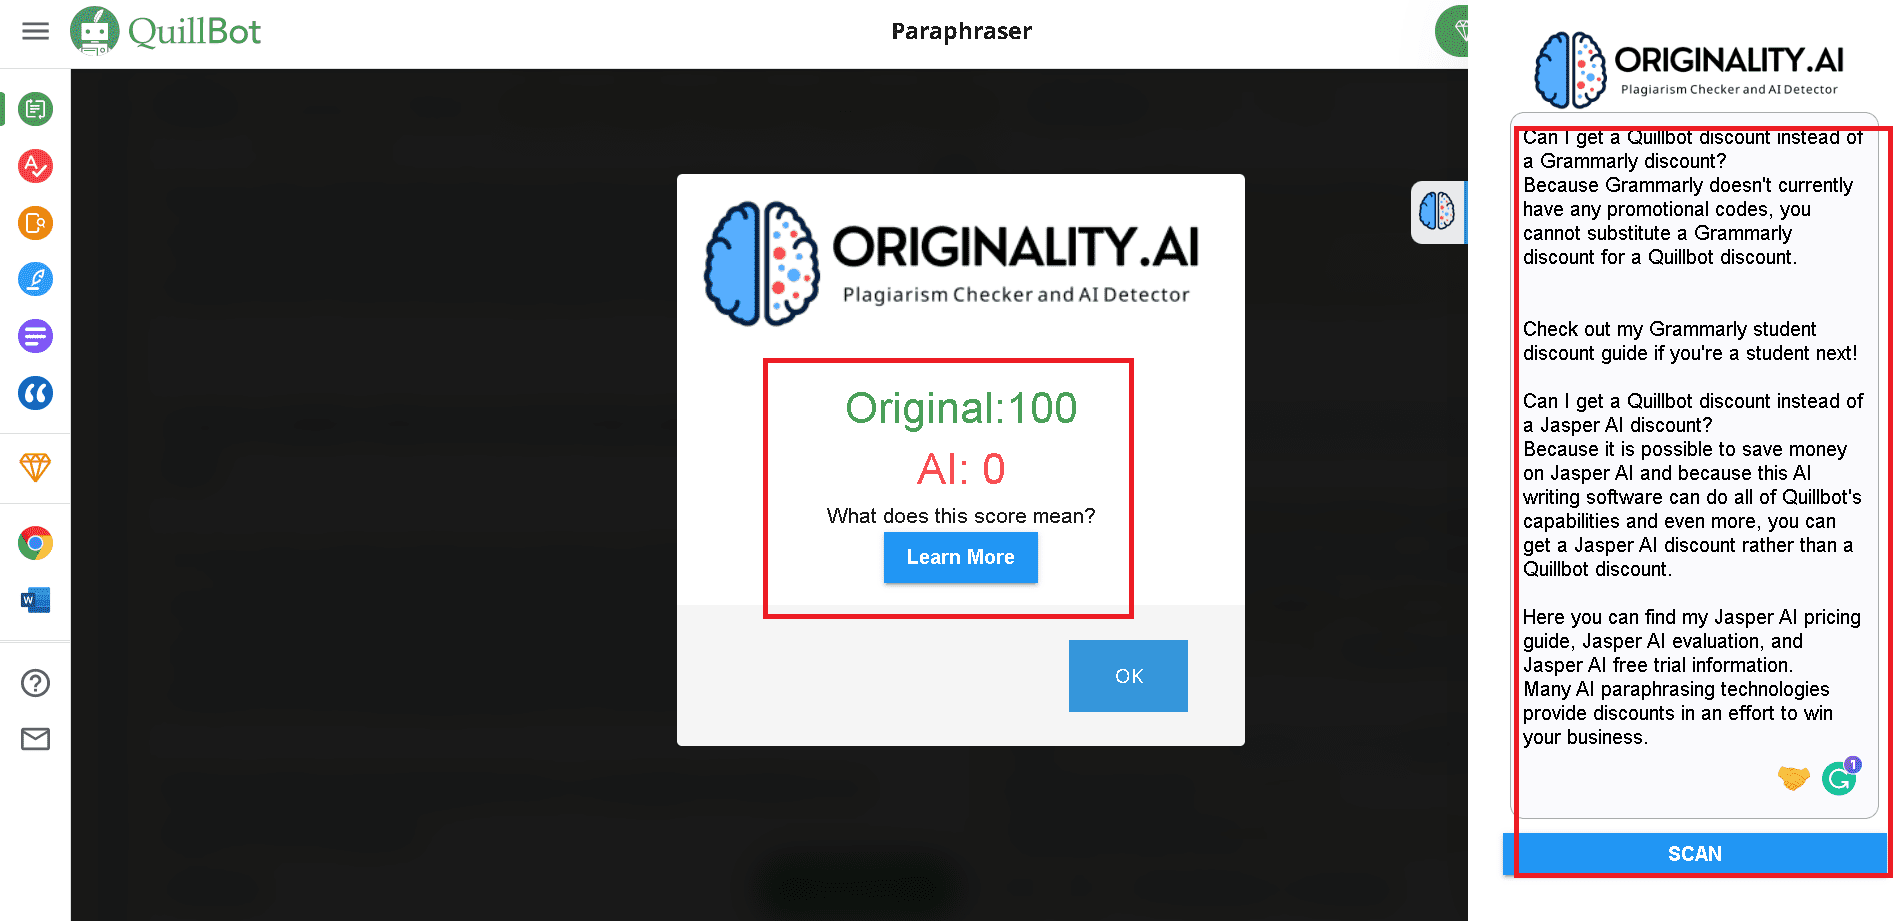 Originality.ai can't detect content that Quillbot paraphrased